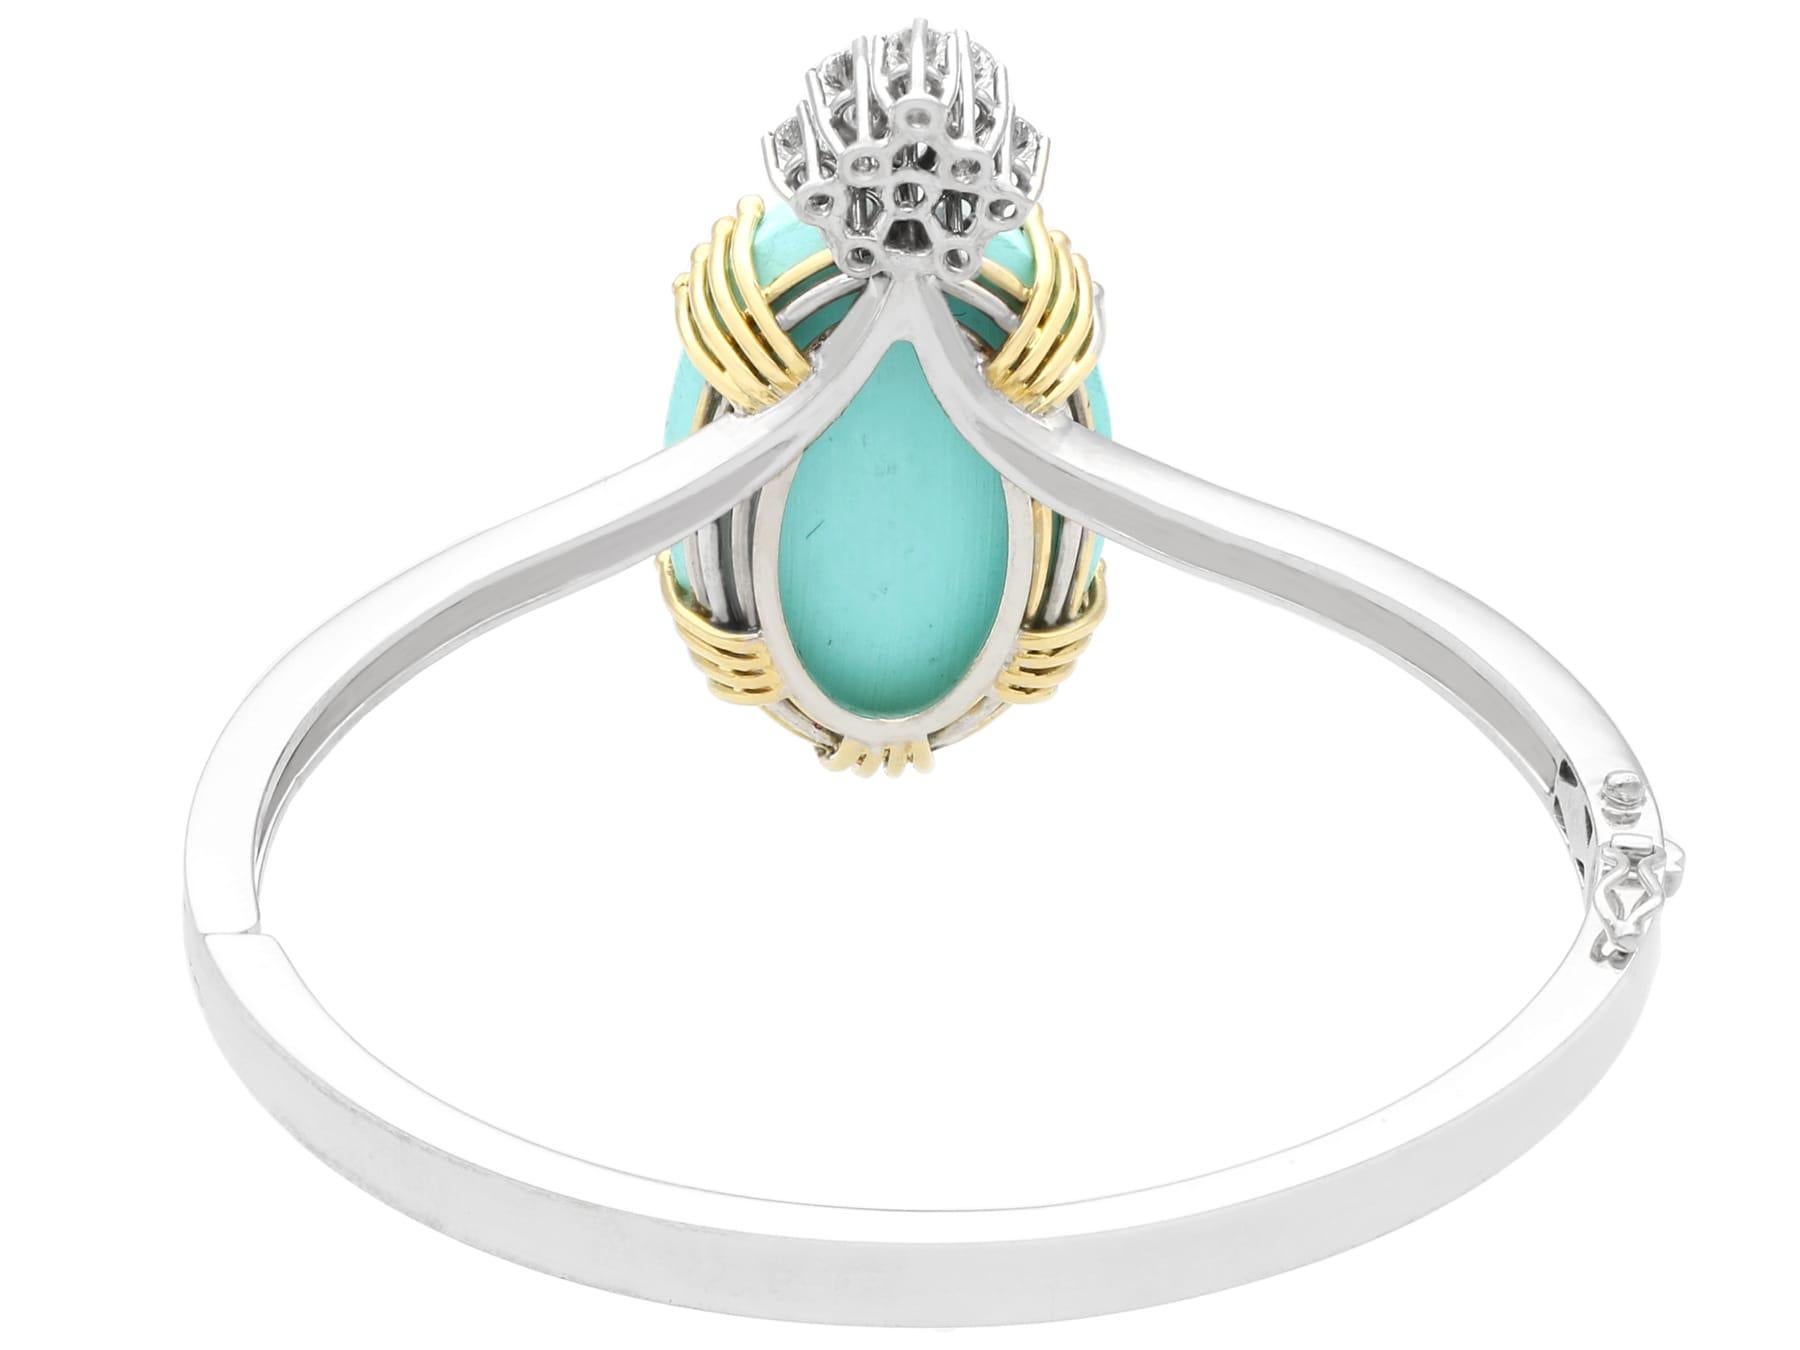 Vintage 43.44 Carat Cabochon Cut Turquoise and Diamond White Gold Bangle For Sale 1